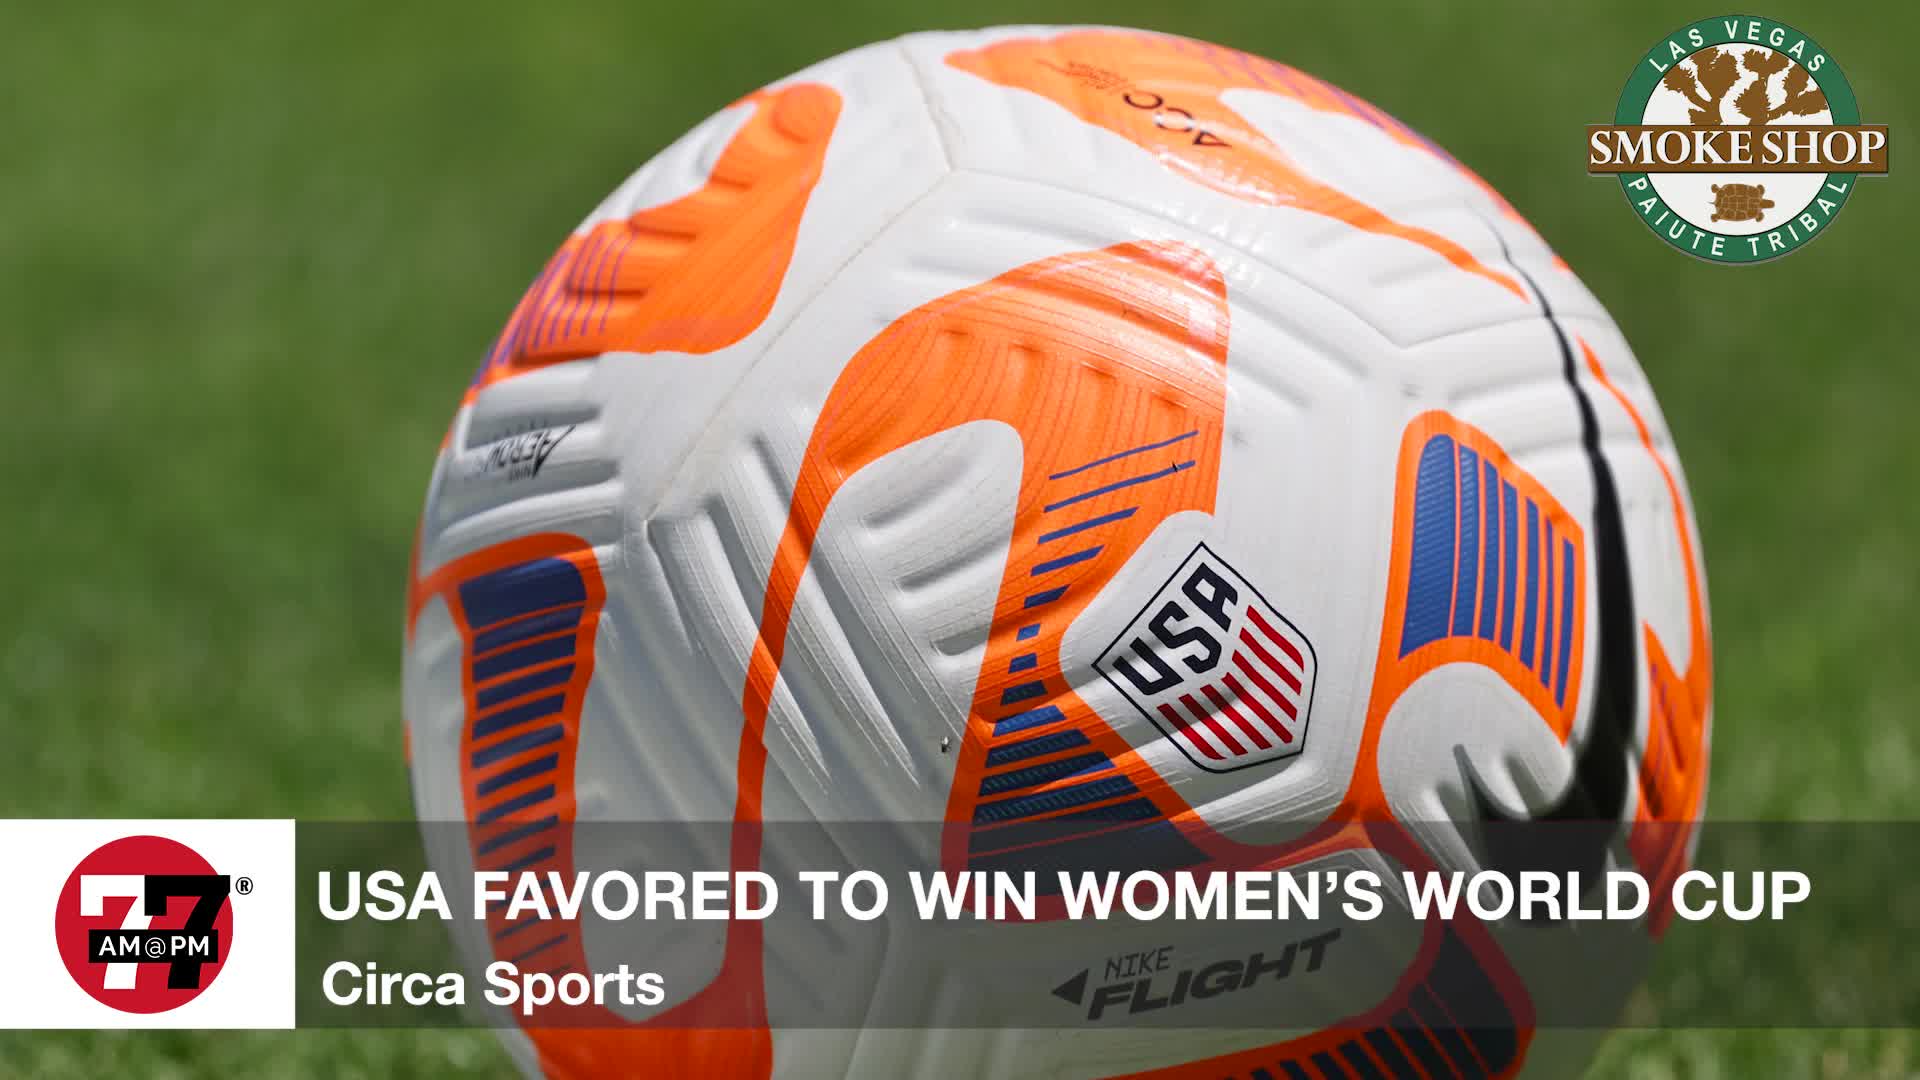 USA favored to win Women’s World Cup